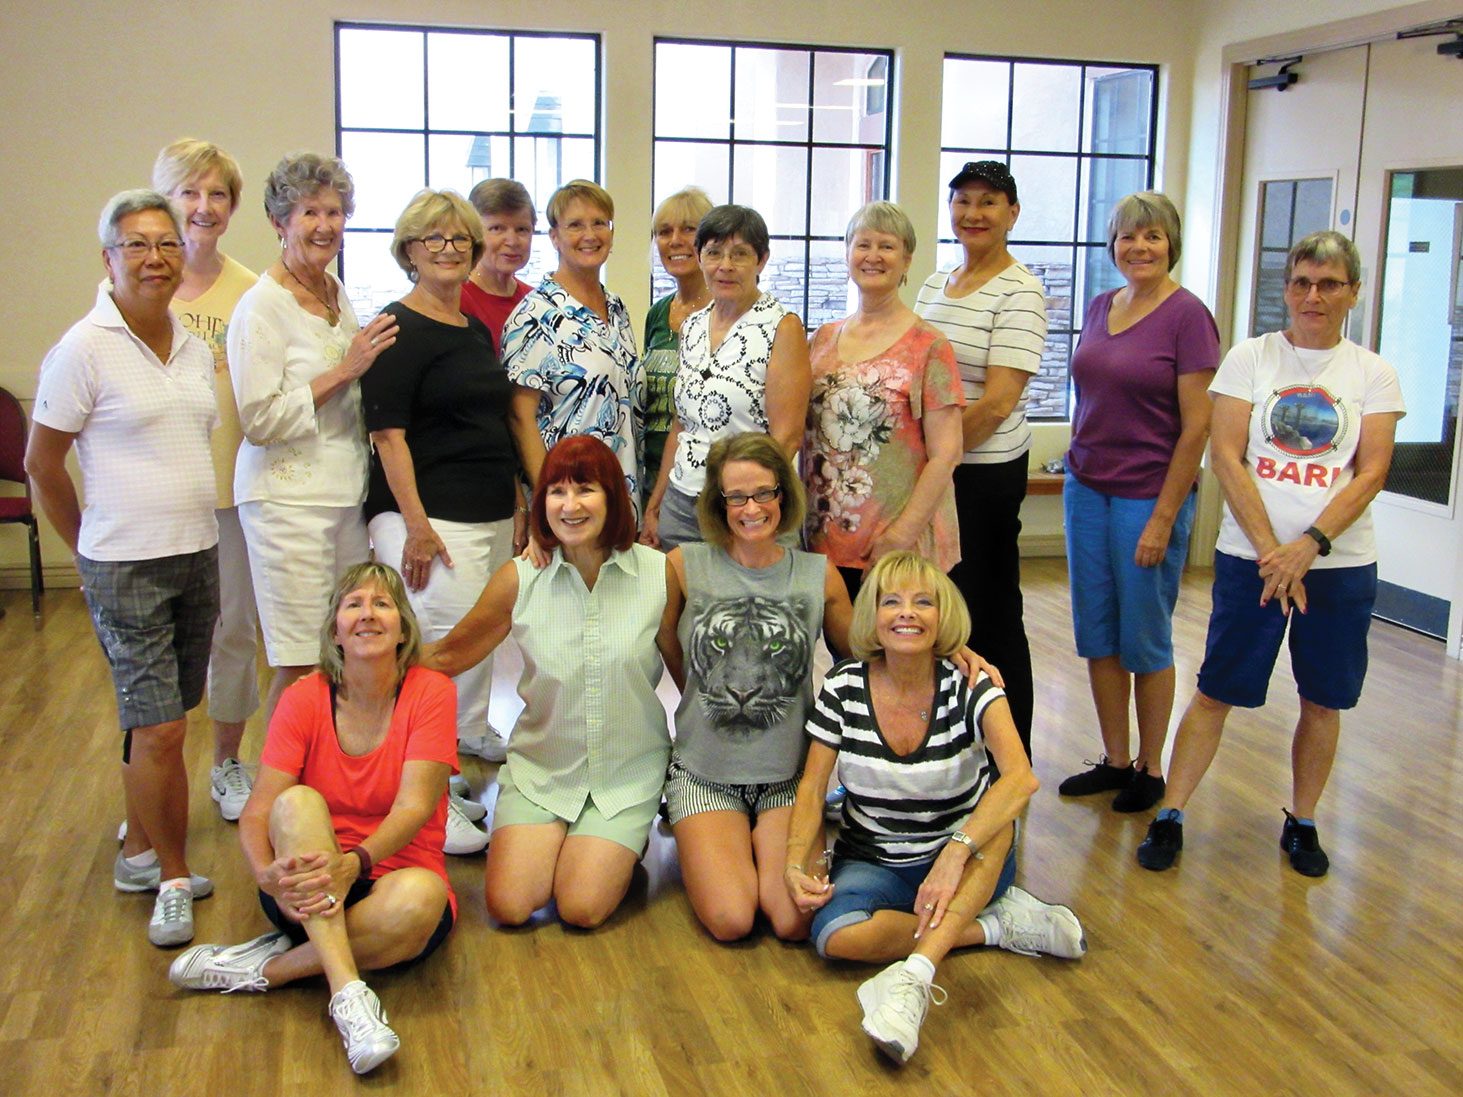 Monday afternoons in the Mesquite aerobics room are fun, cool and energizing for the Level 2 Line Dancers with Rebecca Magdanz; fall registration is almost closed.